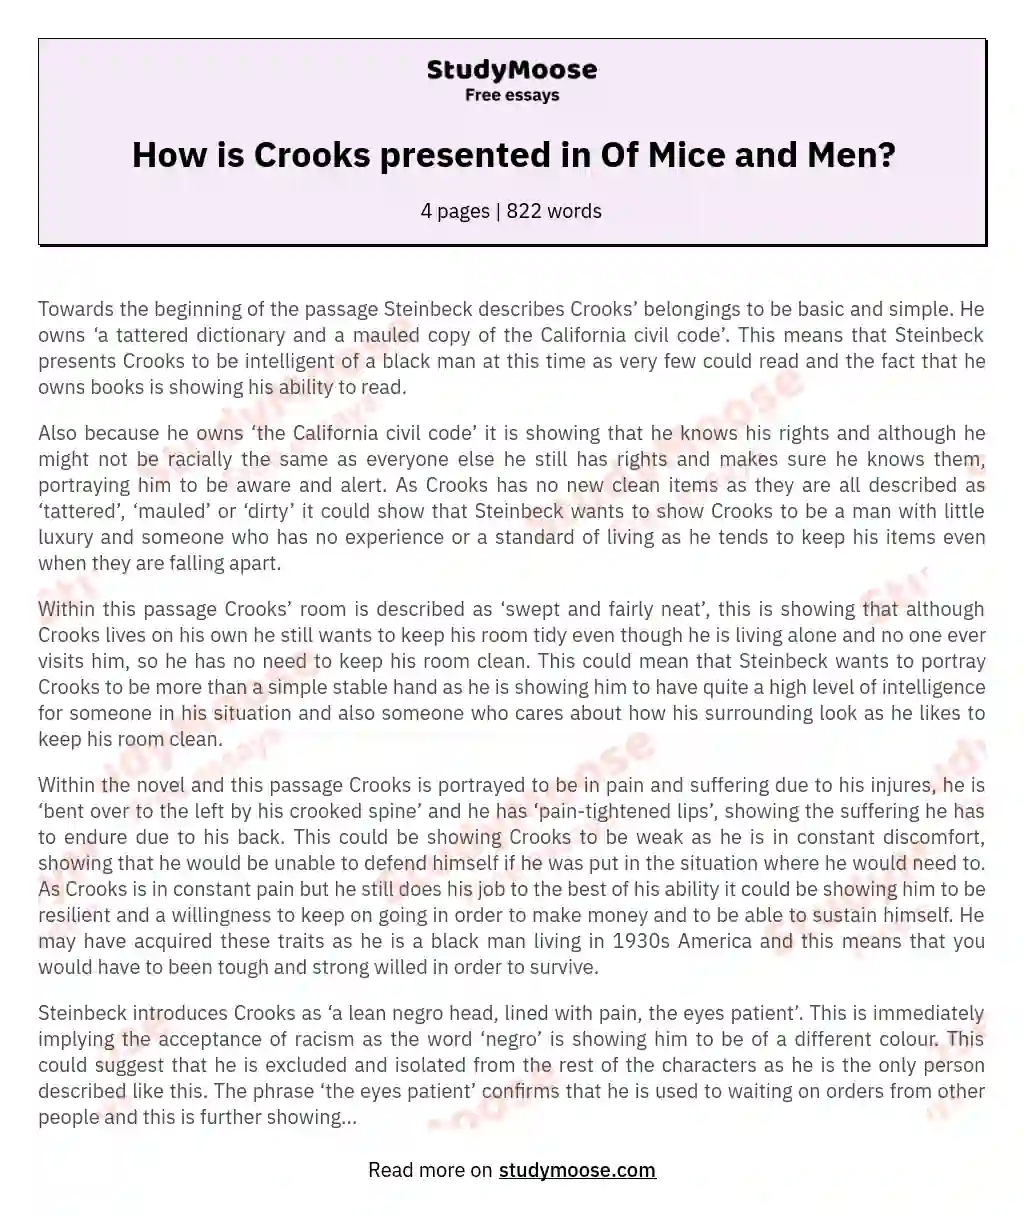 How is Crooks presented in Of Mice and Men? essay